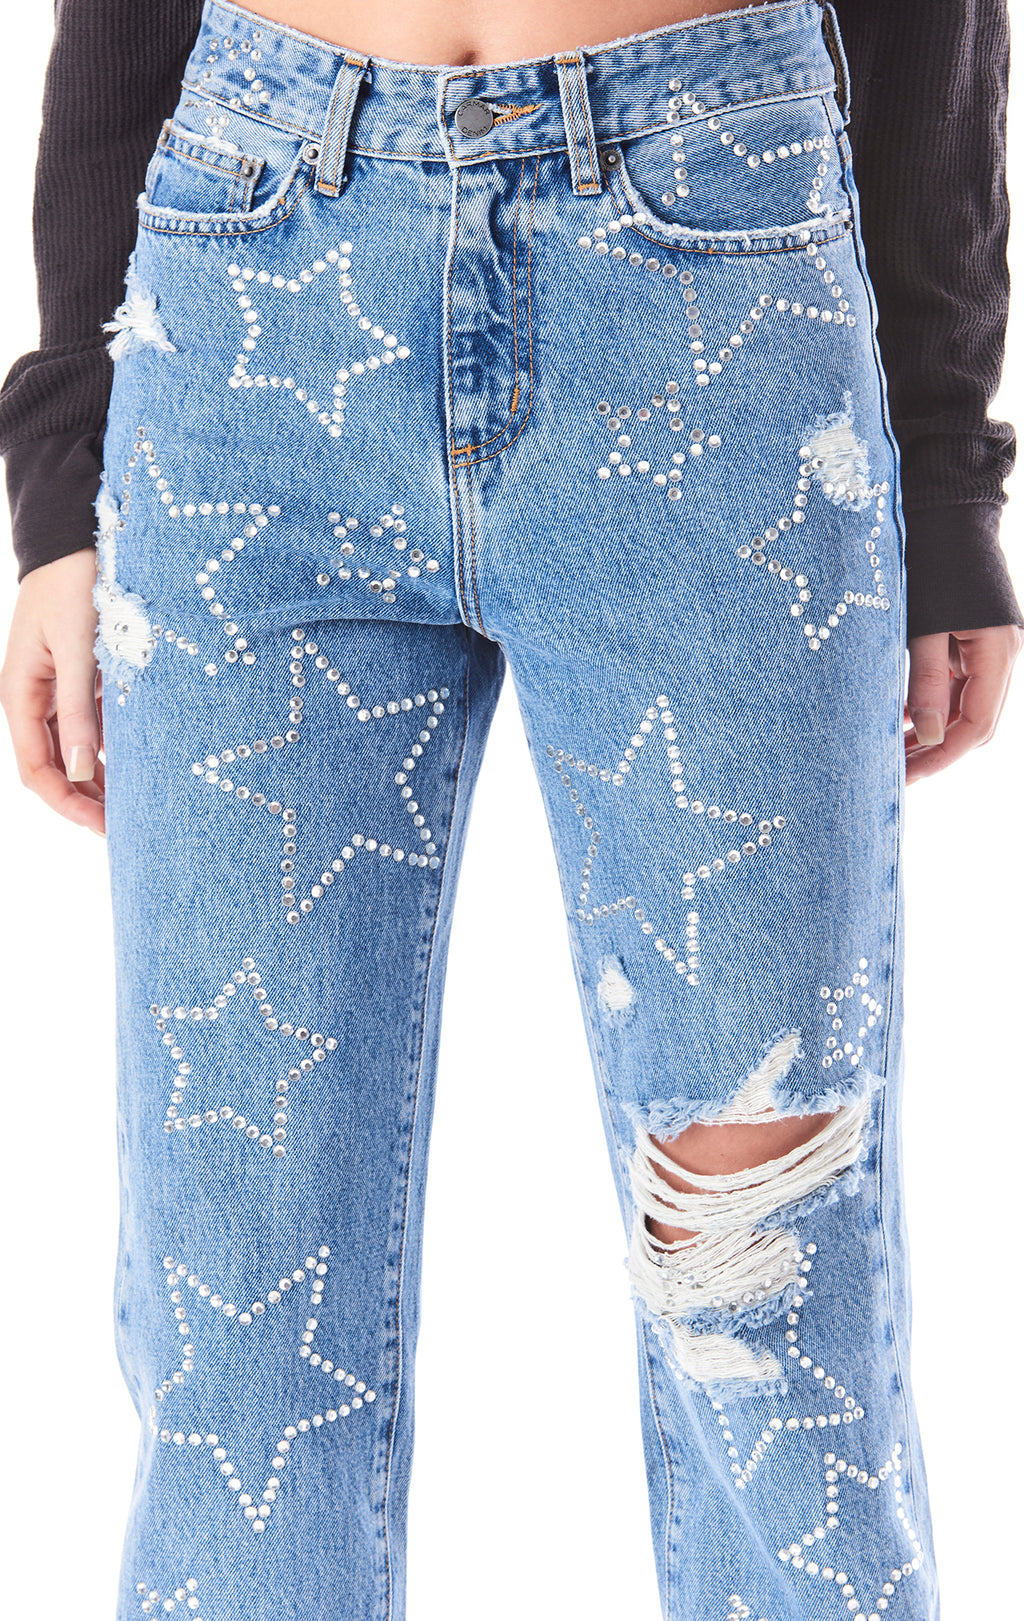 rosewholesale jeans